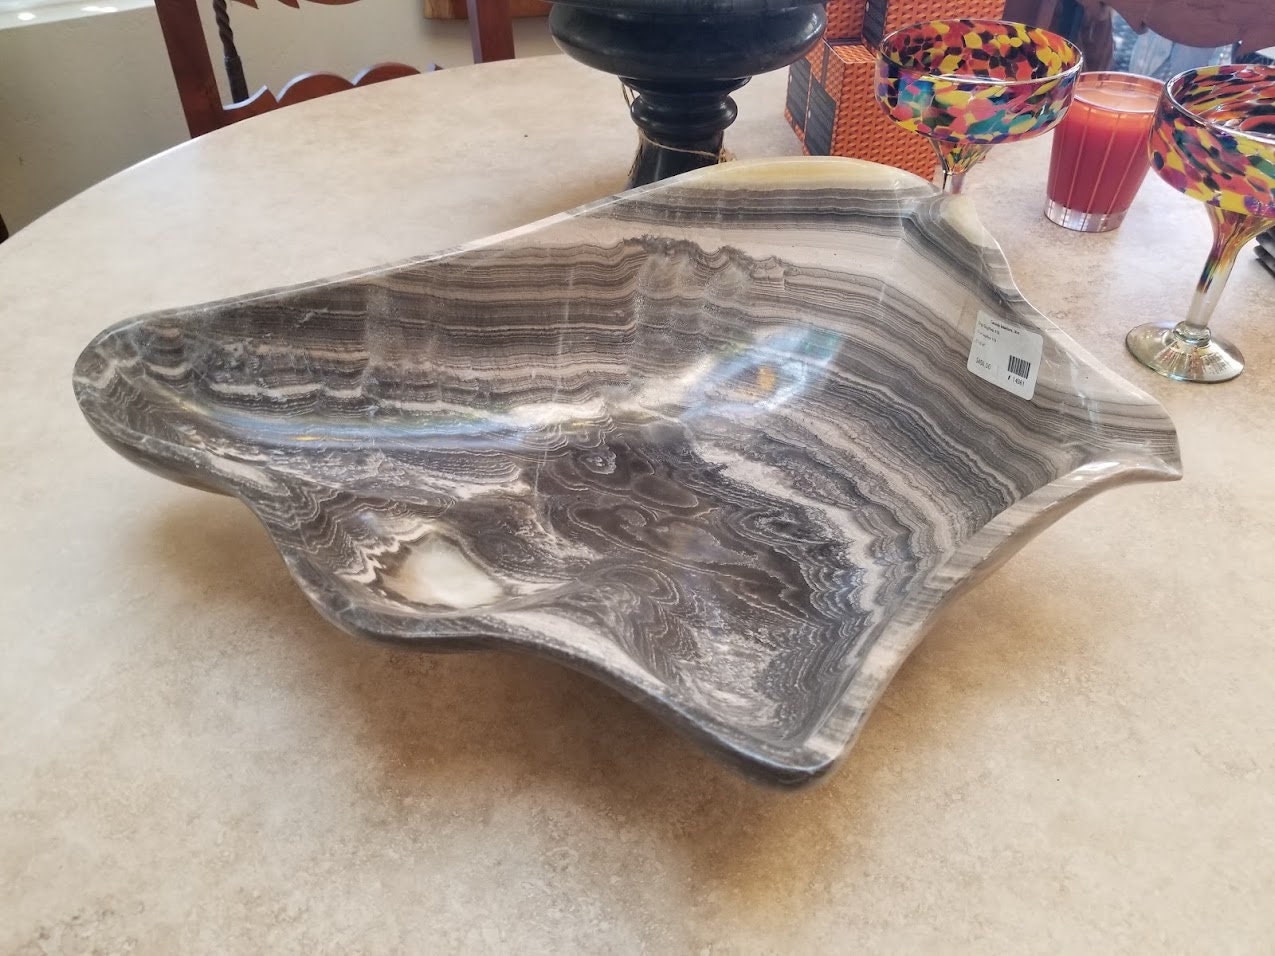 Onyx bowl -  Curved Edge - Black, gray, and cream with a touch of yellow. #14061 - Blue Dorado Designs